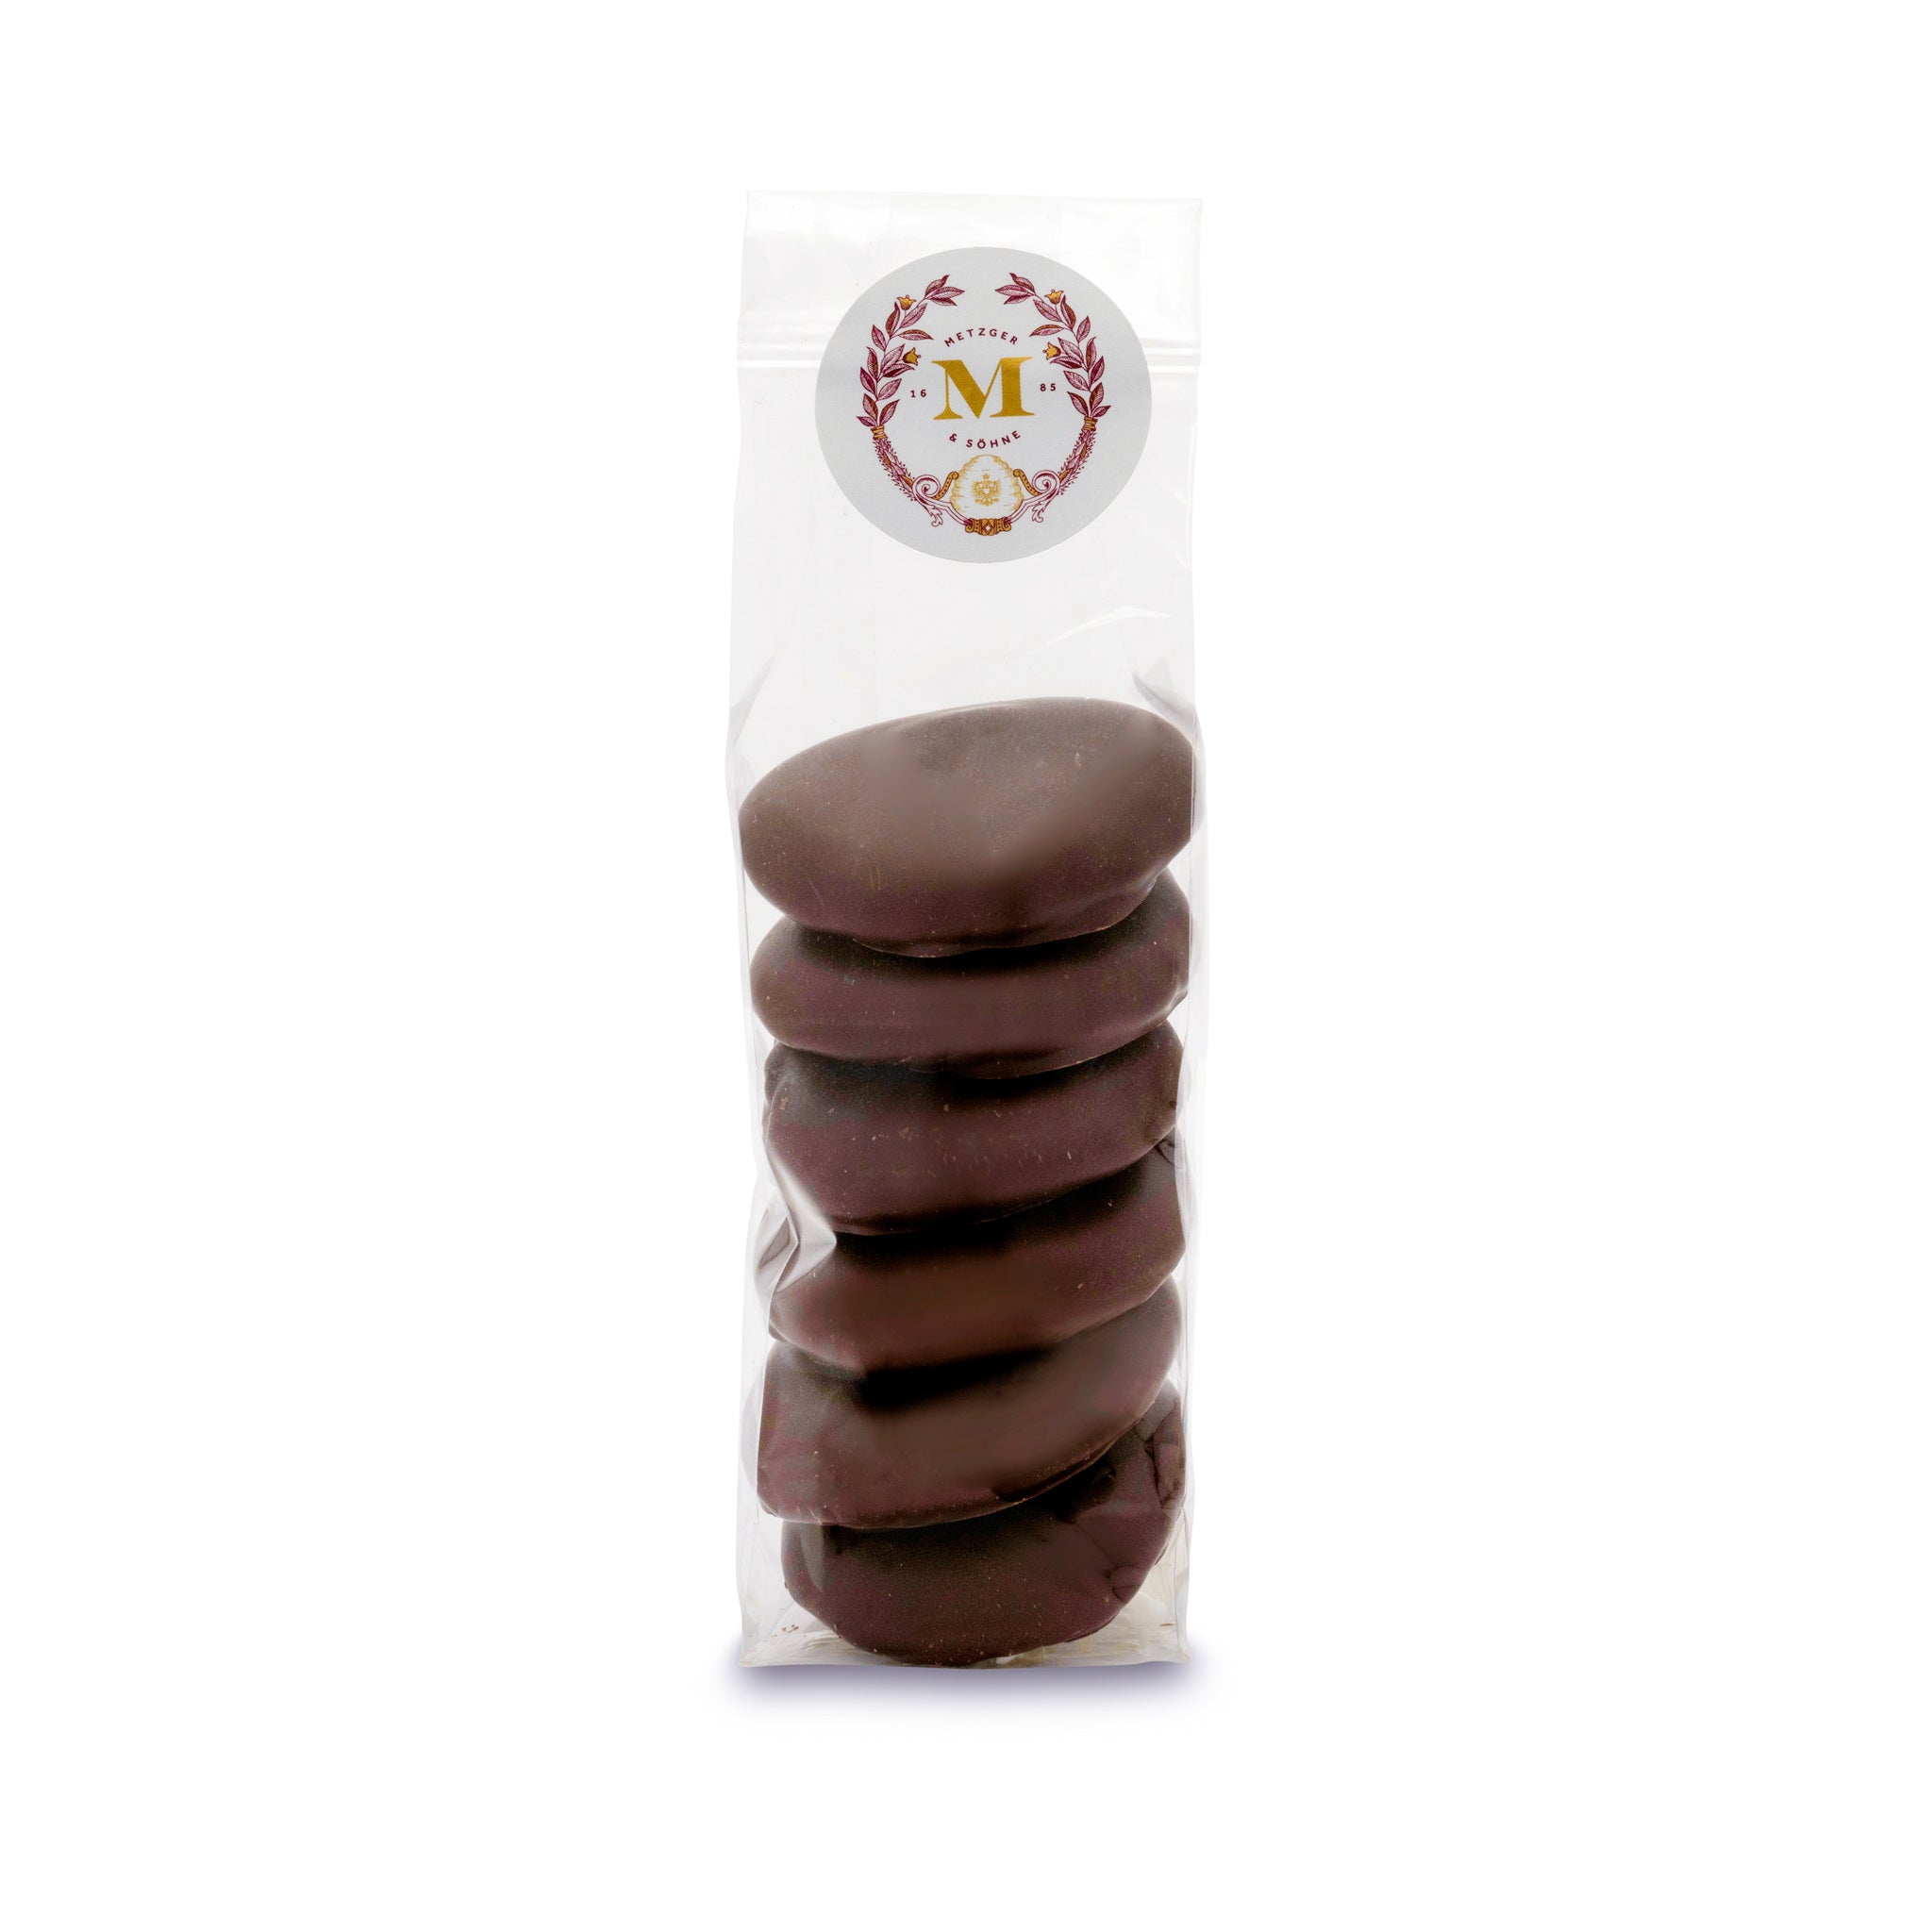 Our chocolate gingerbread spatulas in a bag with a mesh are a delight for young and old: juicy original Lebkuchen, coated in high-quality dark chocolate couverture.